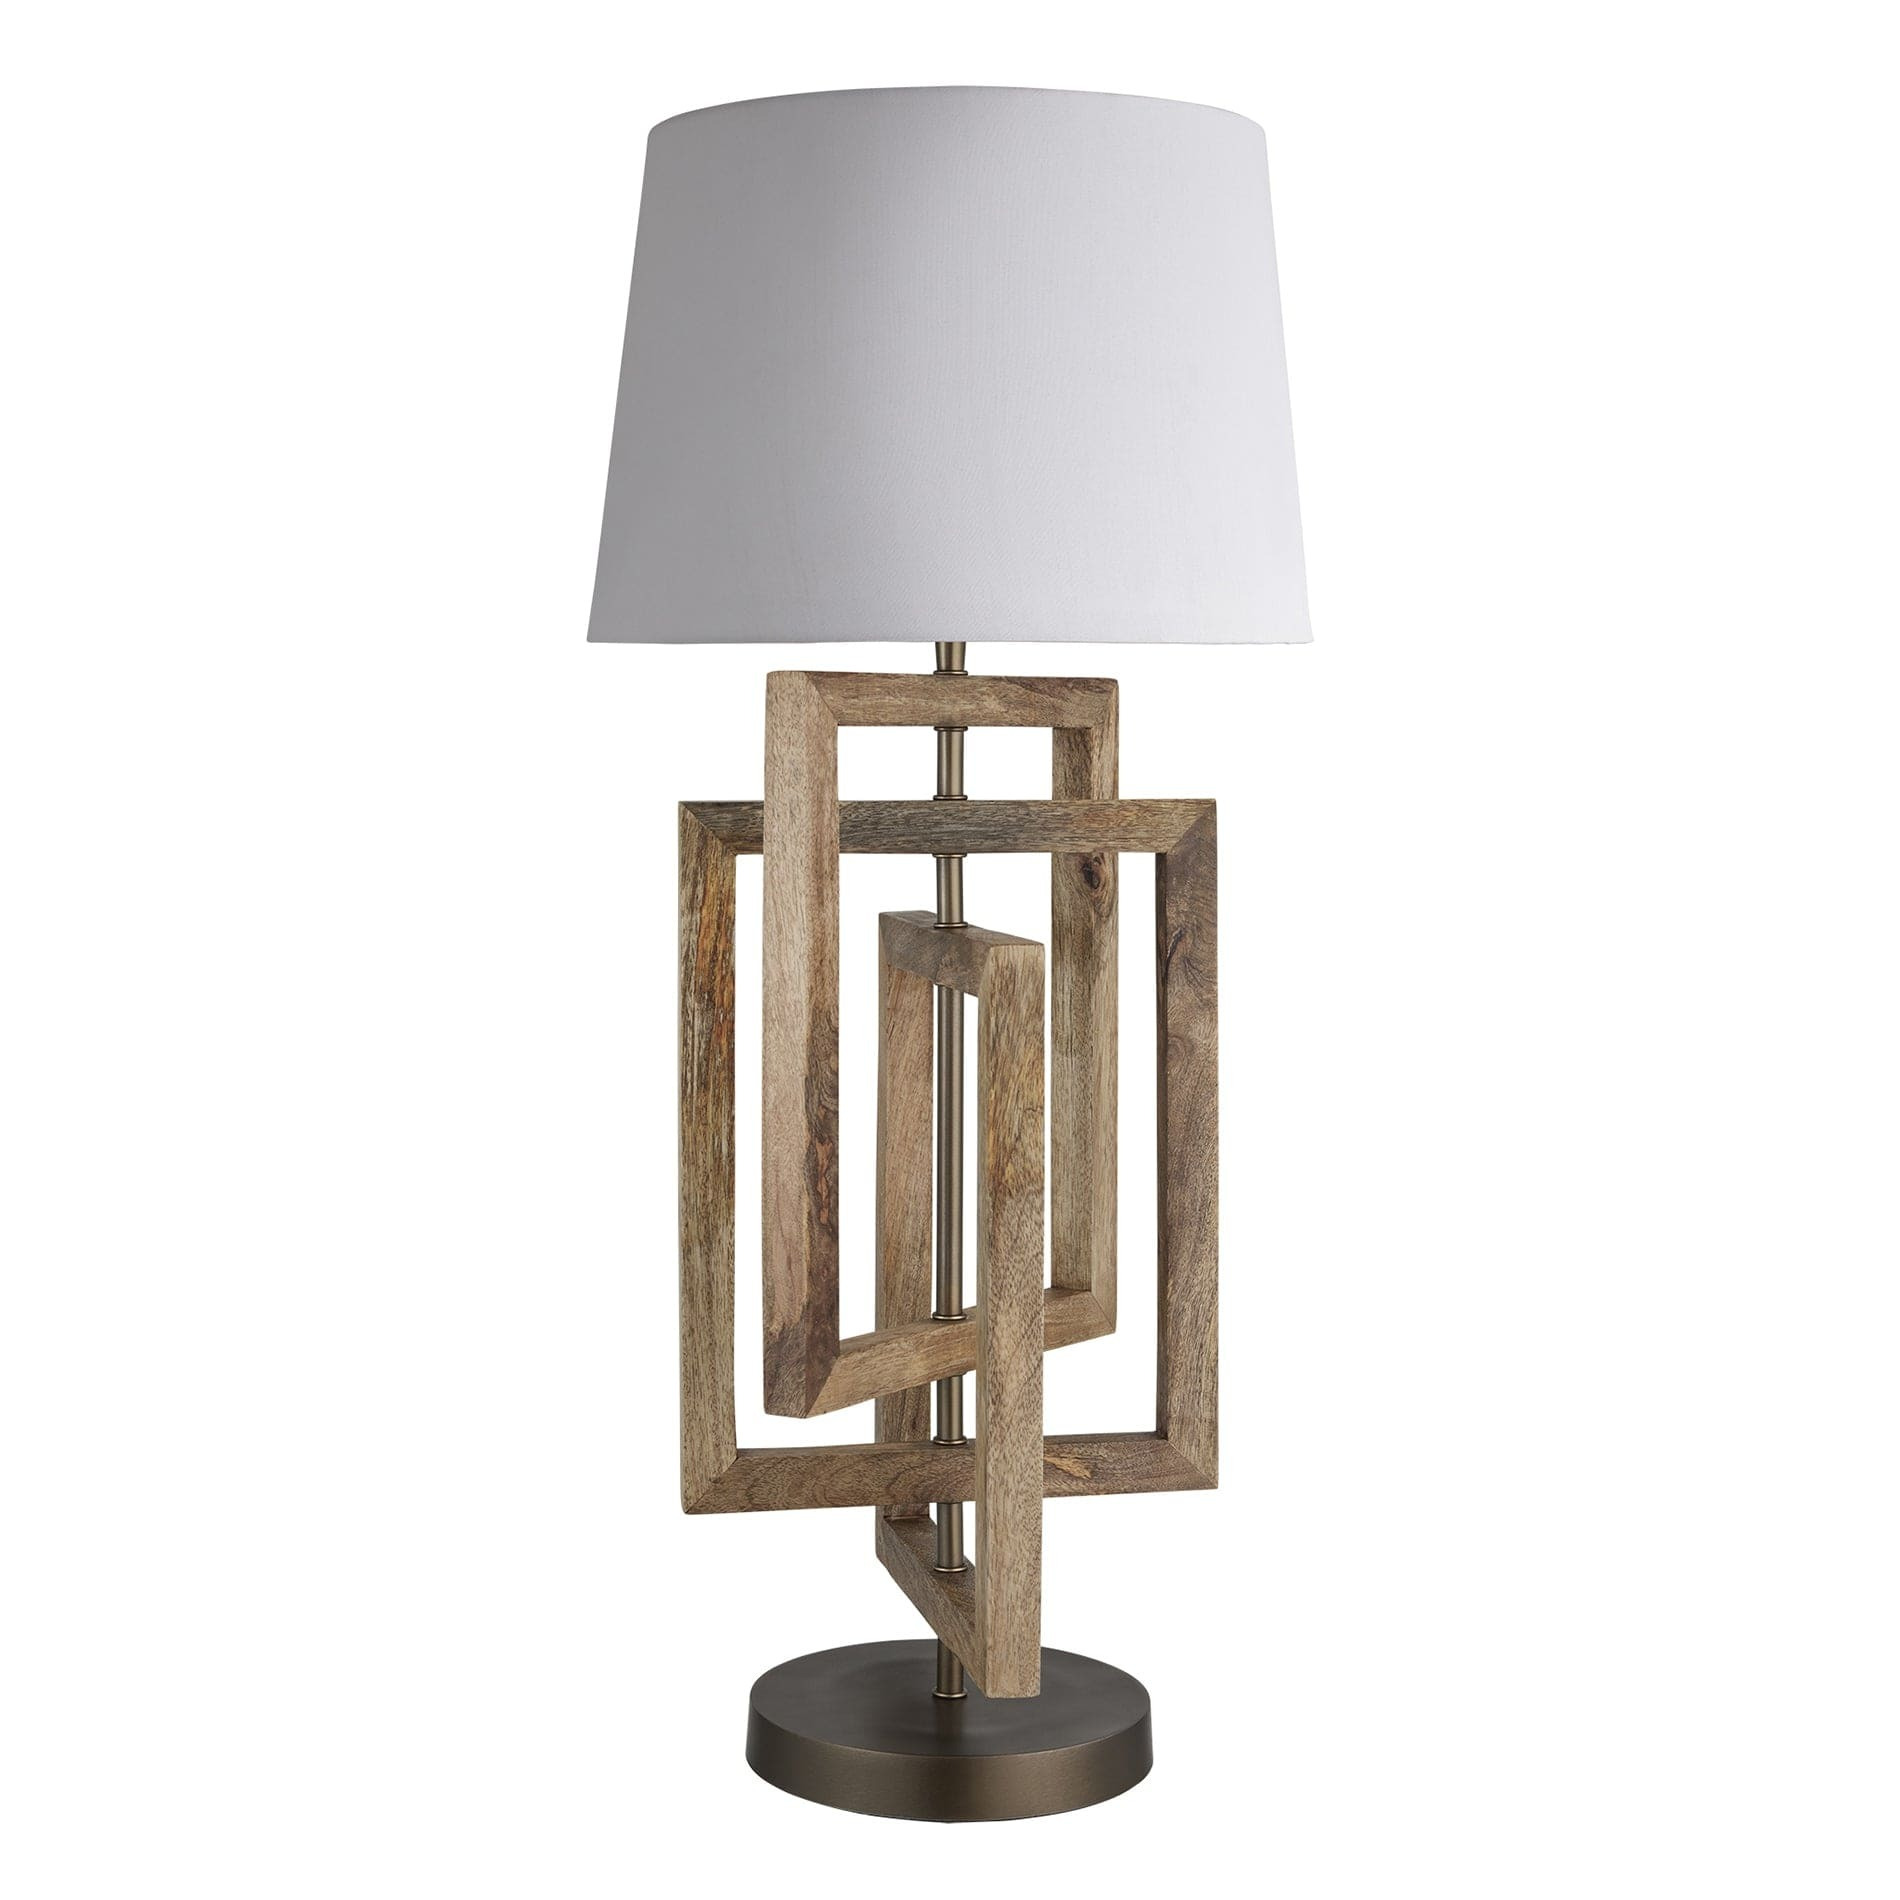 Wooden Geometric Rectangle Table Lamp - Natural